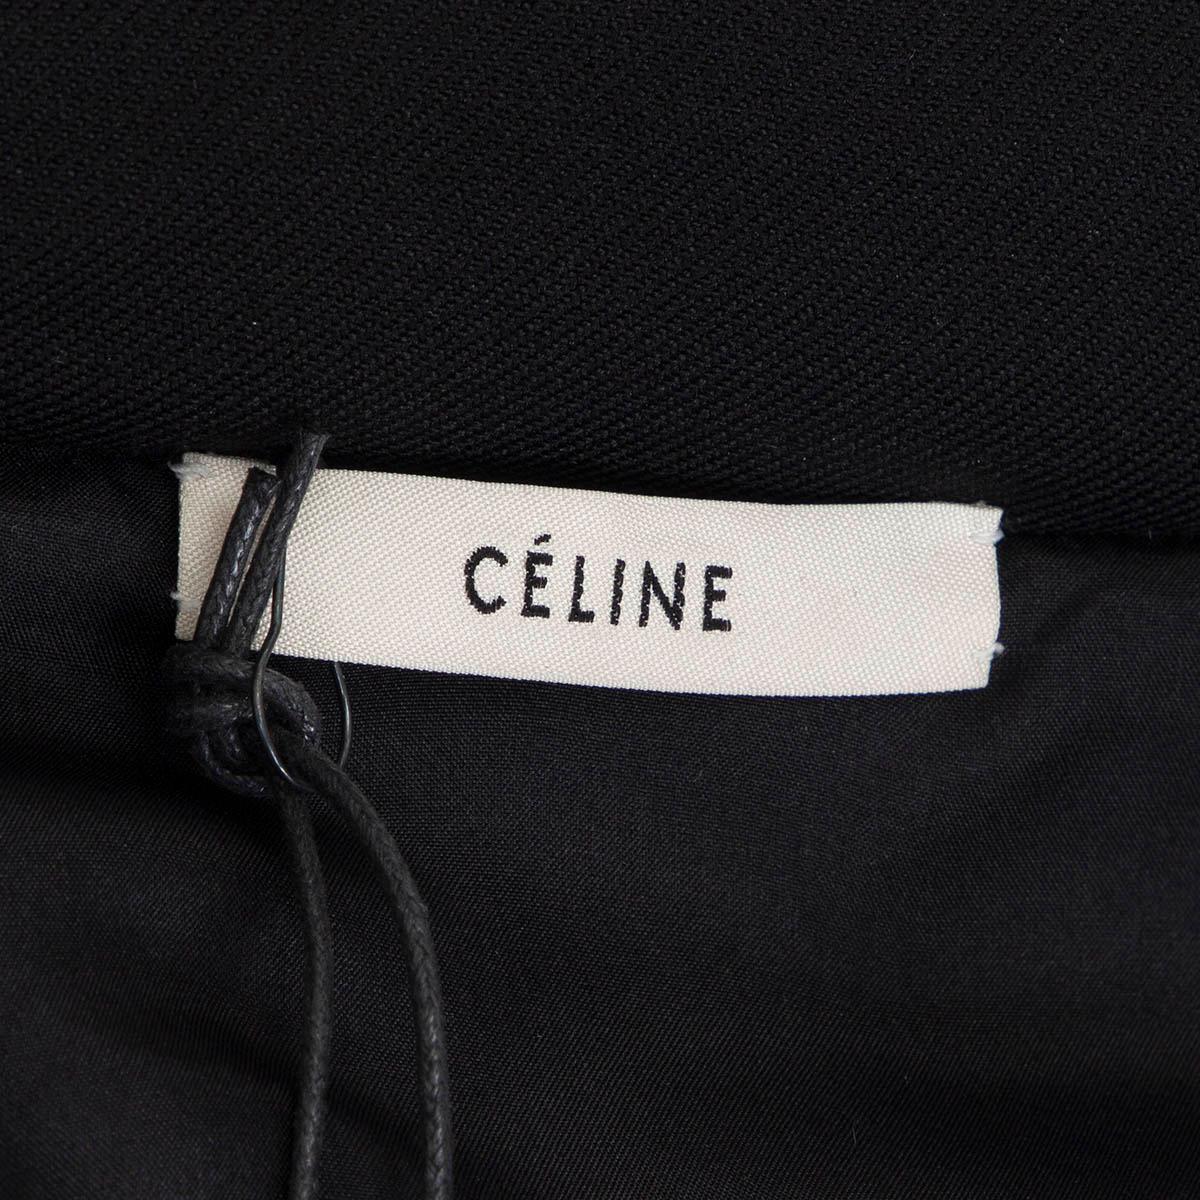 CELINE black polyamide CONTRAST BUTTON PEACOAT Coat Jacket 40 M In Excellent Condition For Sale In Zürich, CH